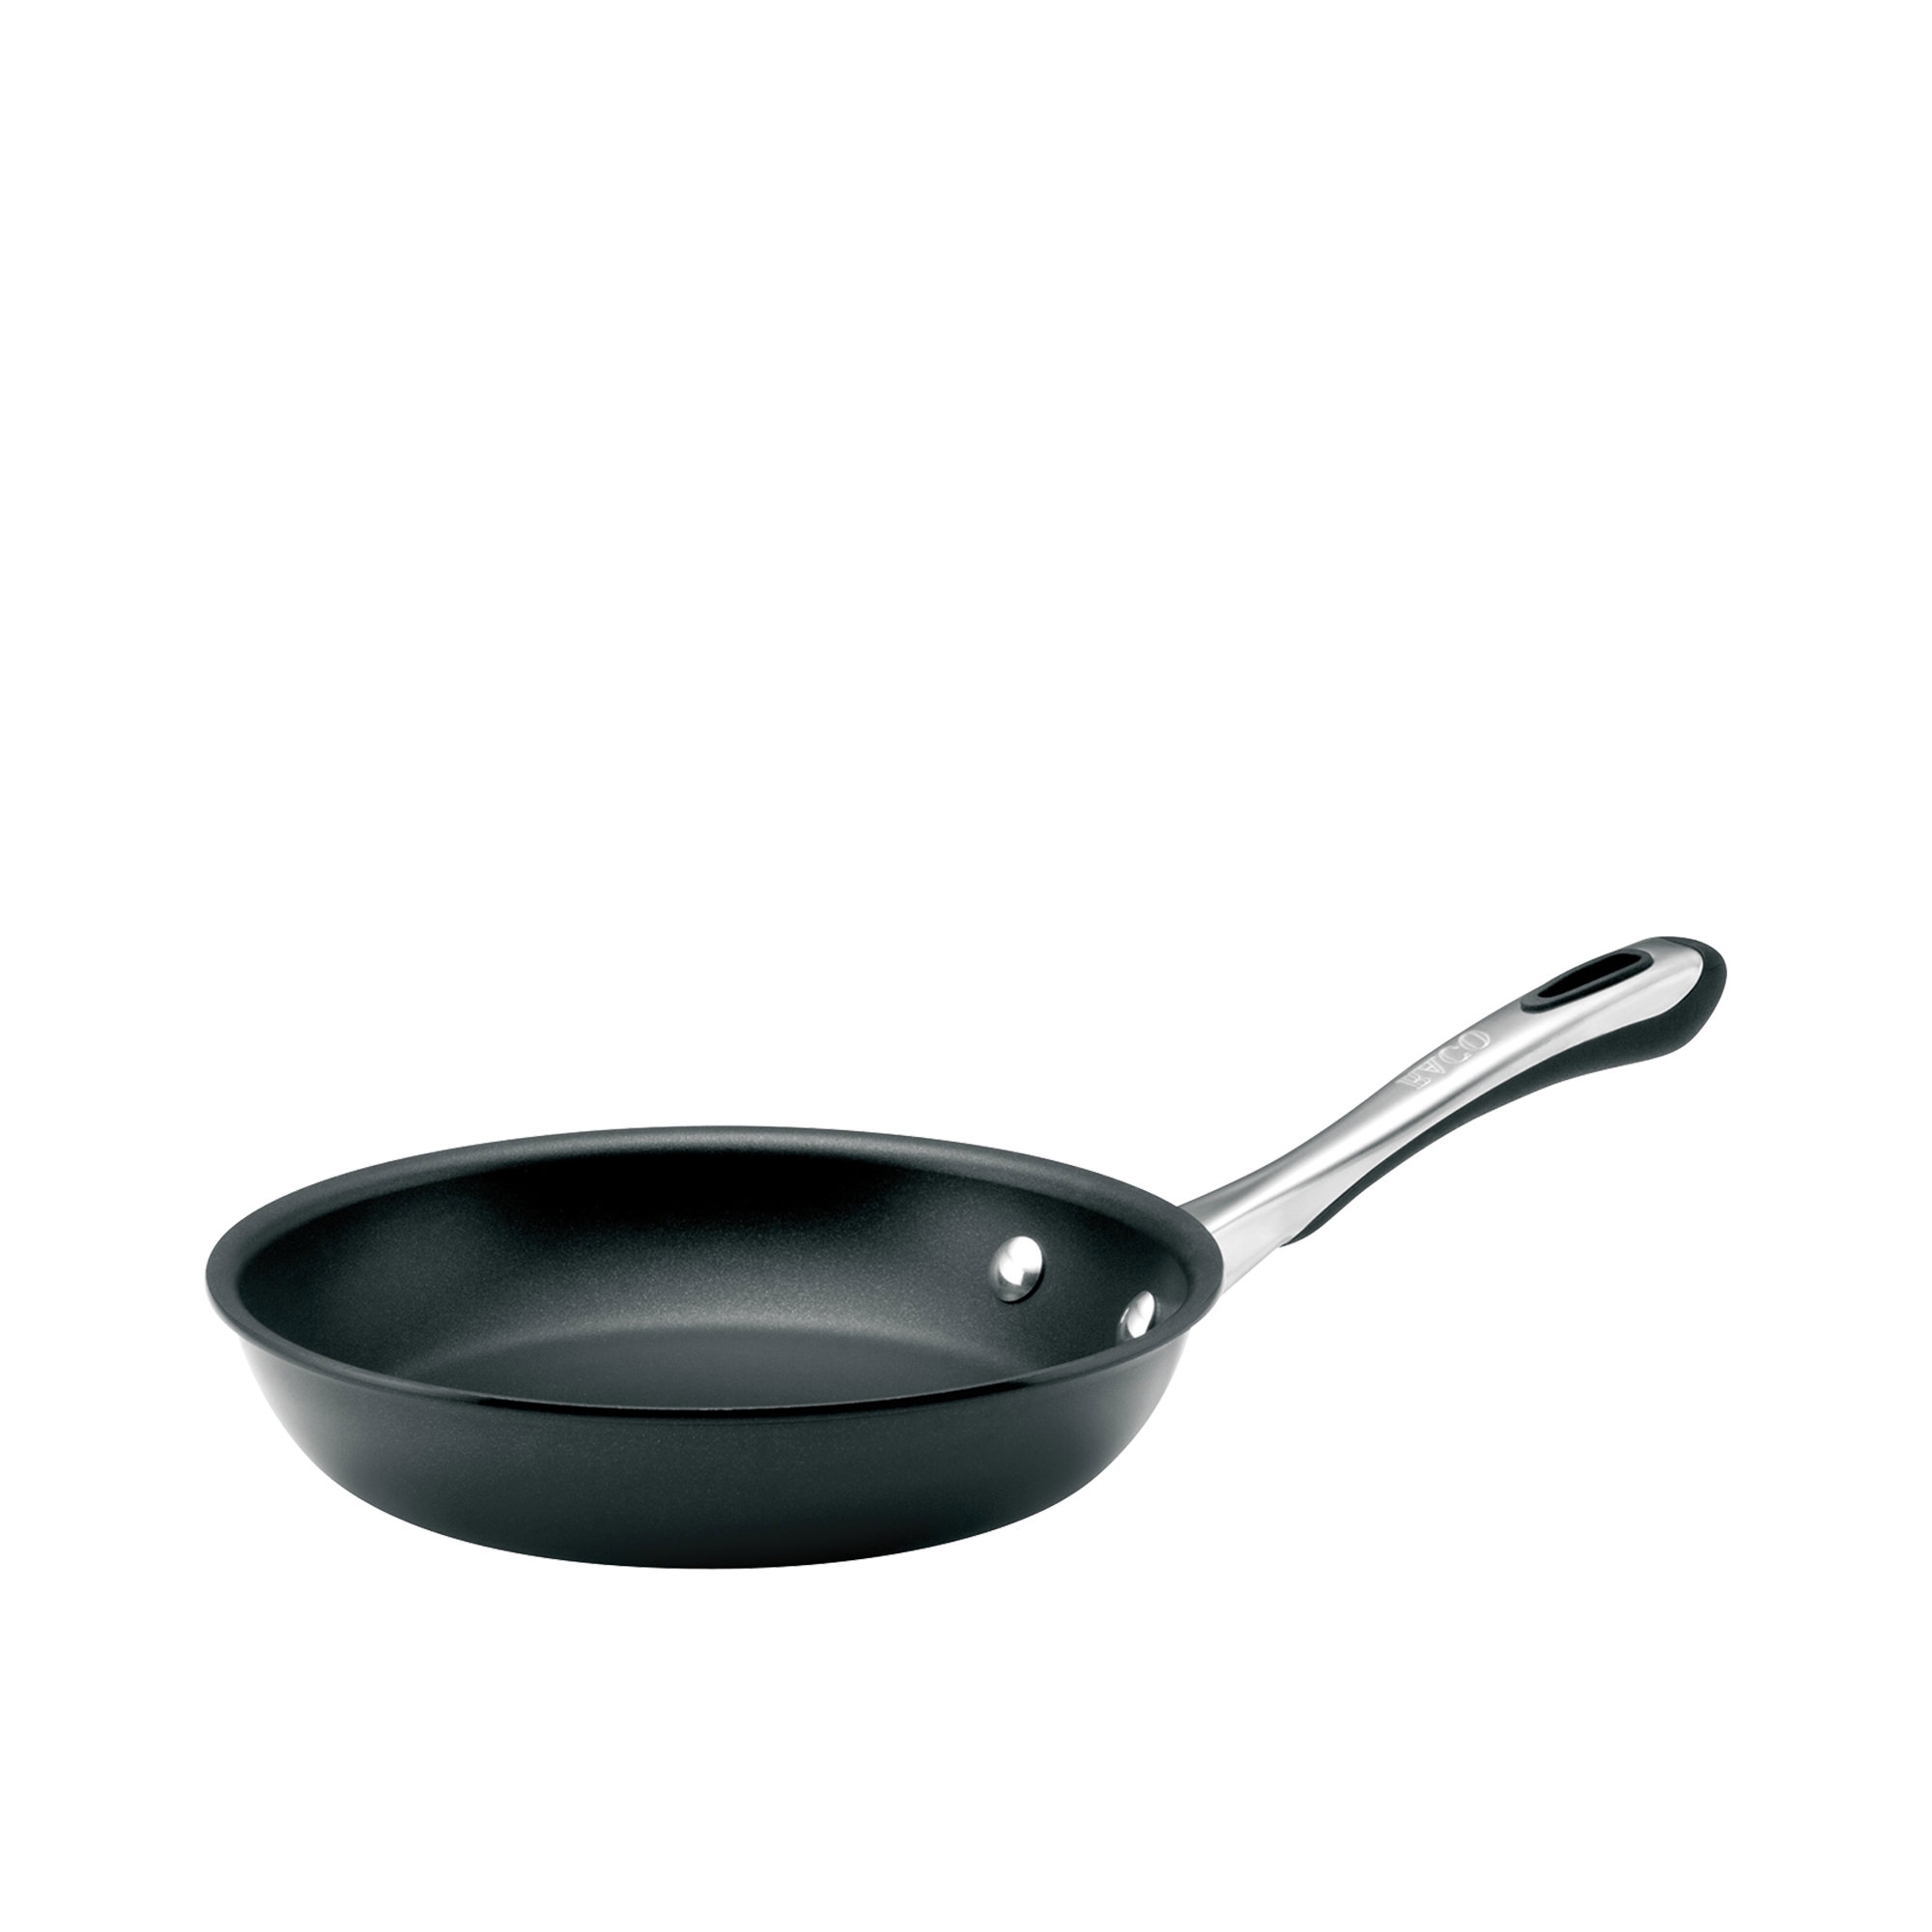 Raco Contemporary French Skillet 20cm Image 1